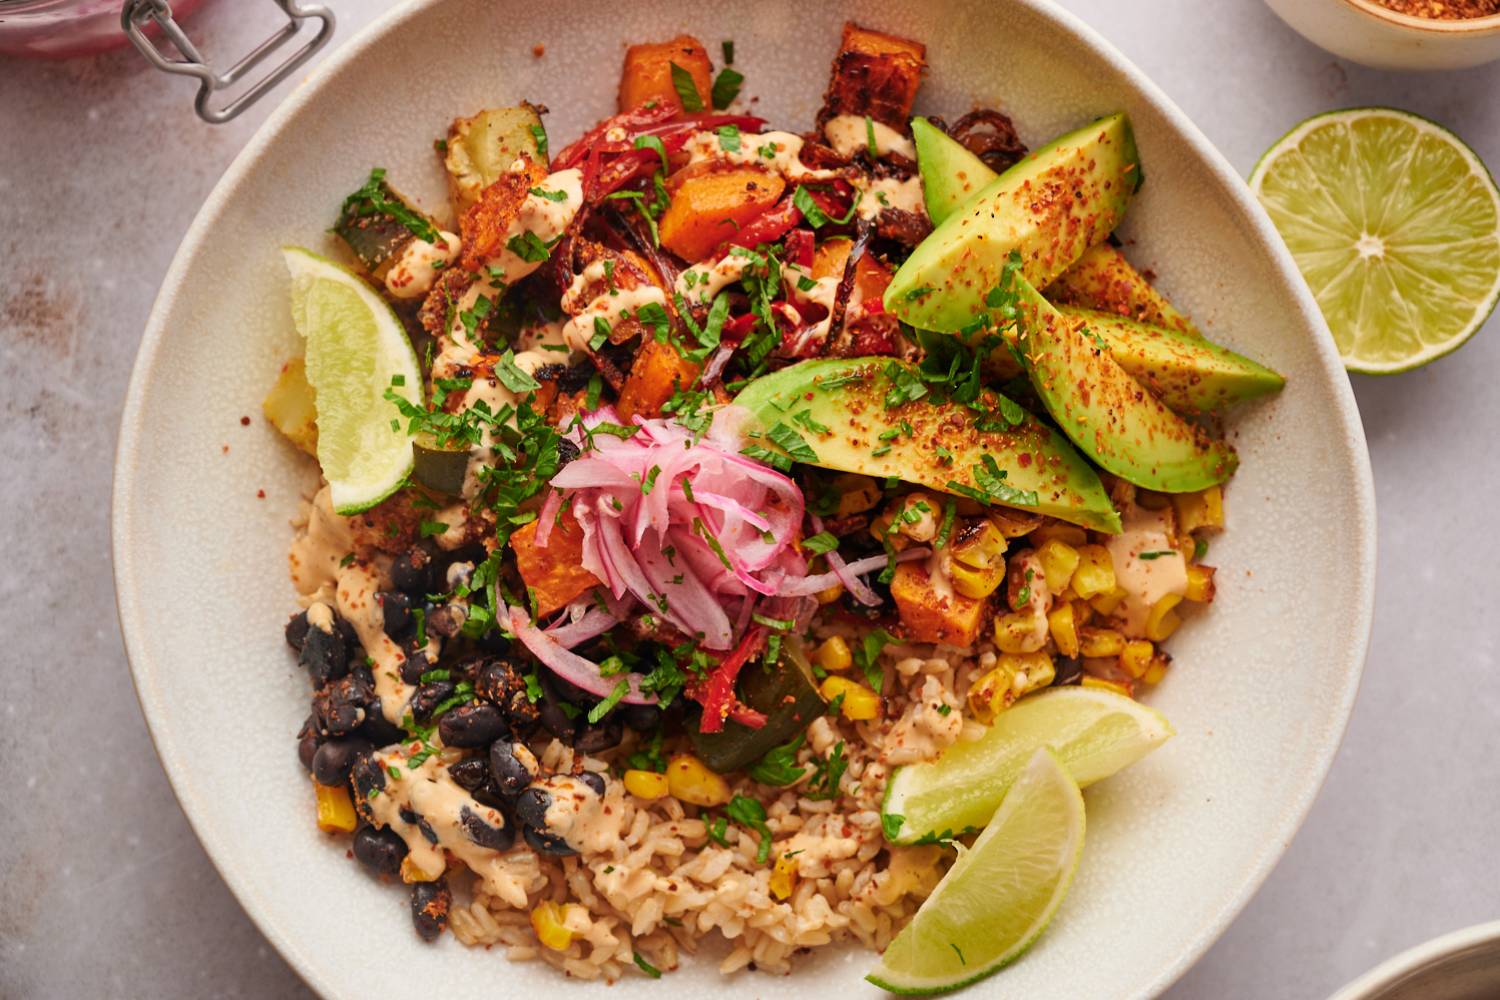 Sweet potato bowls with roasted sweet potatoes, black beans, corn, peppers, onions, zucchini, and brown rice topped with avocado, cilantro, and limes.